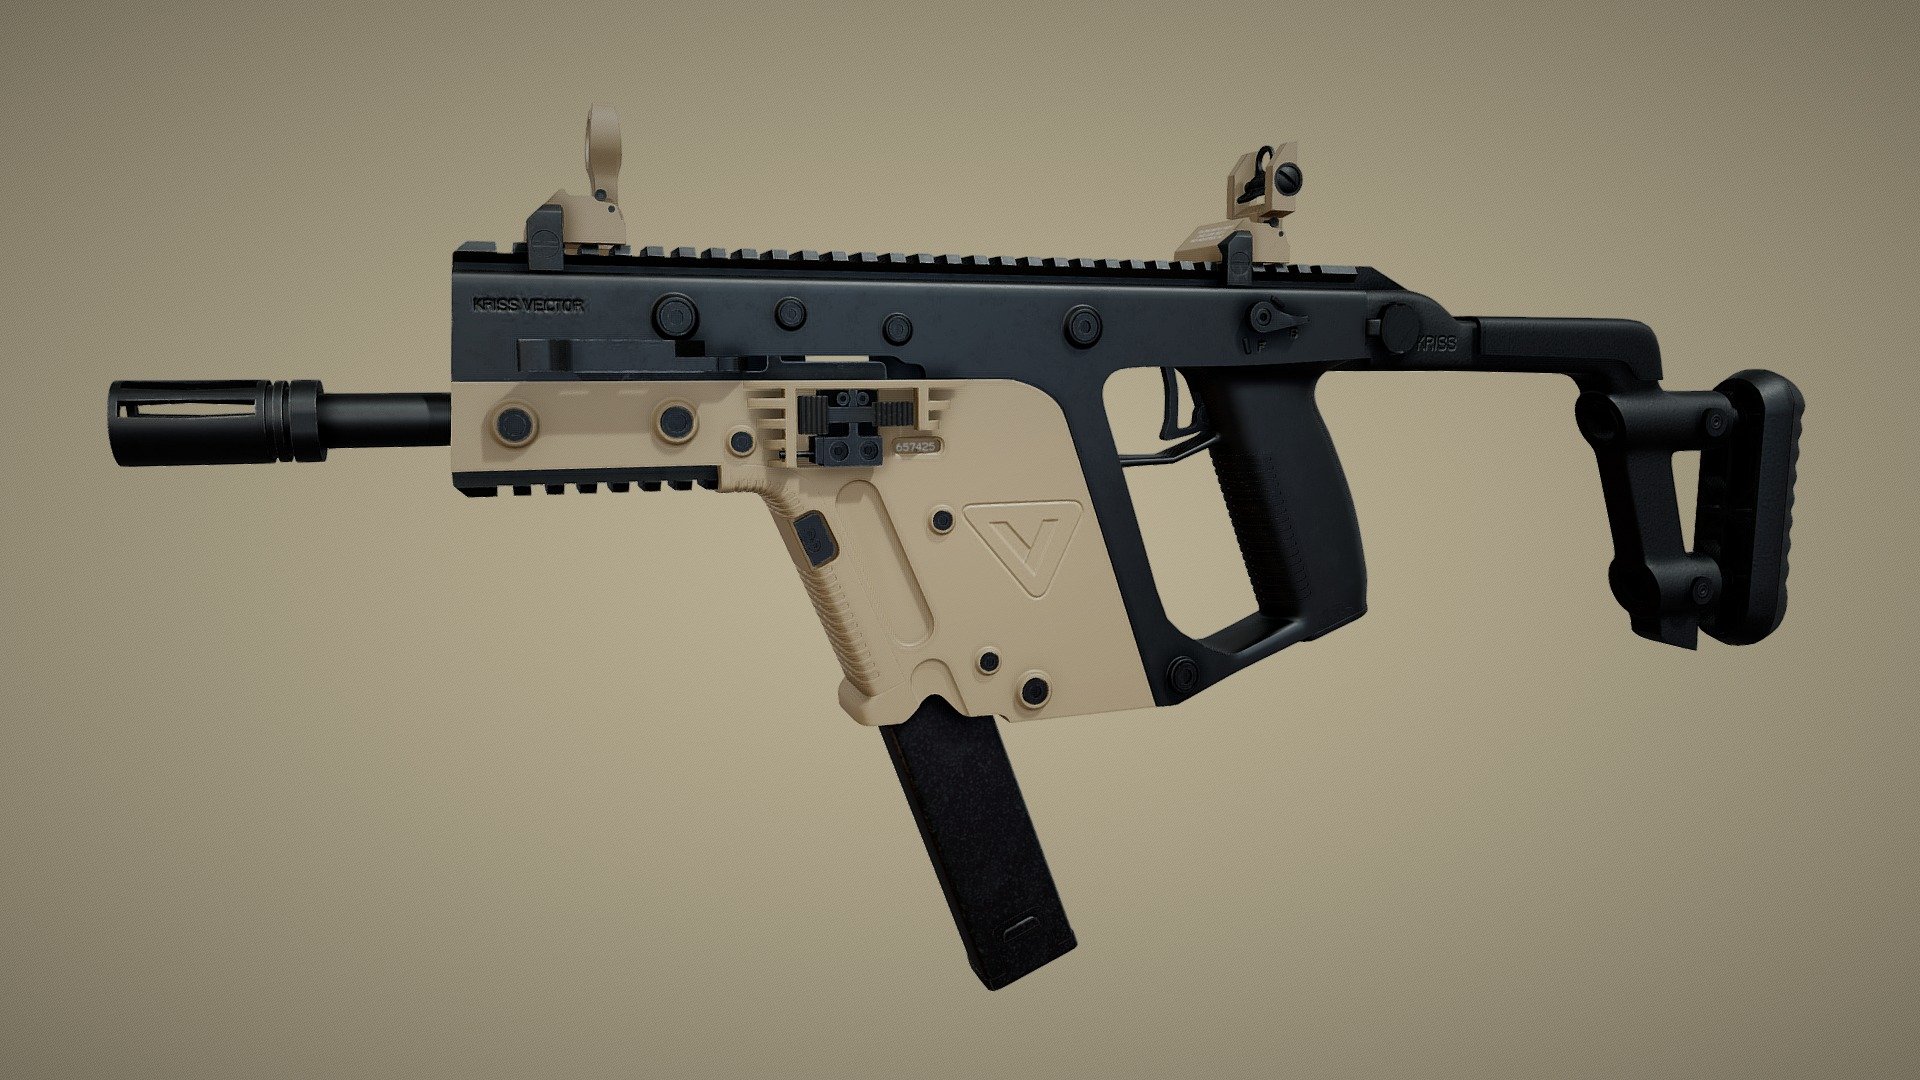 The KRISS Vector is a series of weapons based upon the parent submachine gun design developed by the American company KRISS USA, formerly Transformational Defense Industries. They use an unconventional delayed blowback system combined with in-line design to reduce perceived recoil and muzzle climb - KRISS Vector Submachine gun - Buy Royalty Free 3D model by luisbcompany 3d model